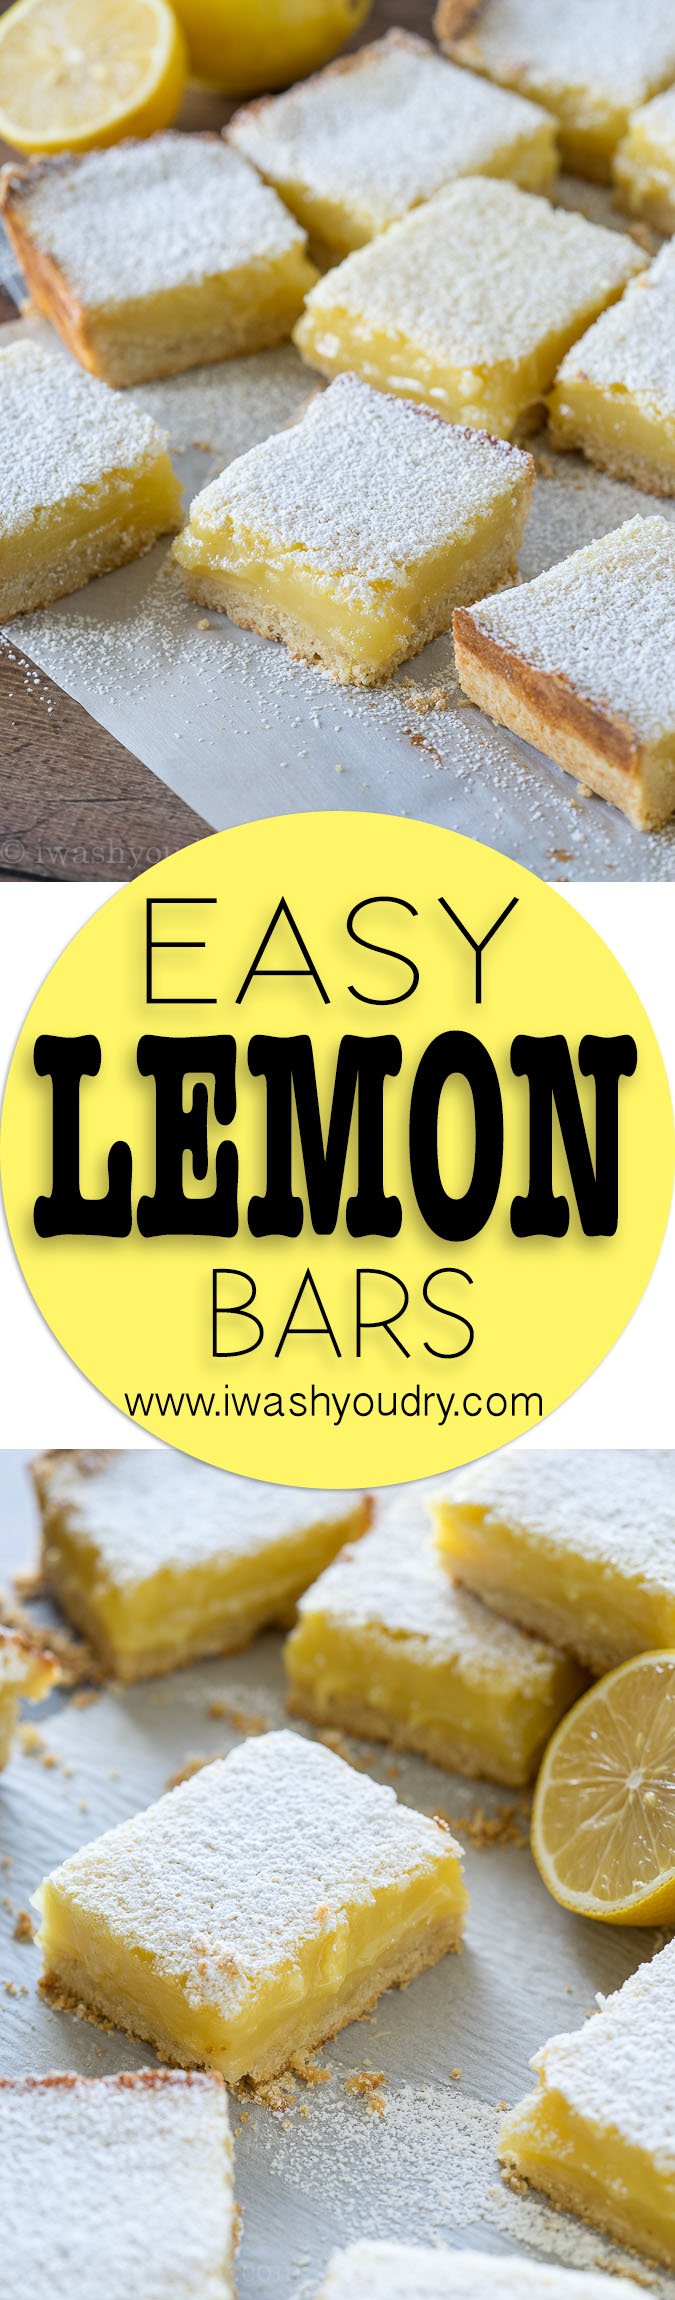 This Easy Lemon Bar Recipe was a HUGE hit! Everyone loved the flavor and texture out of these bars!